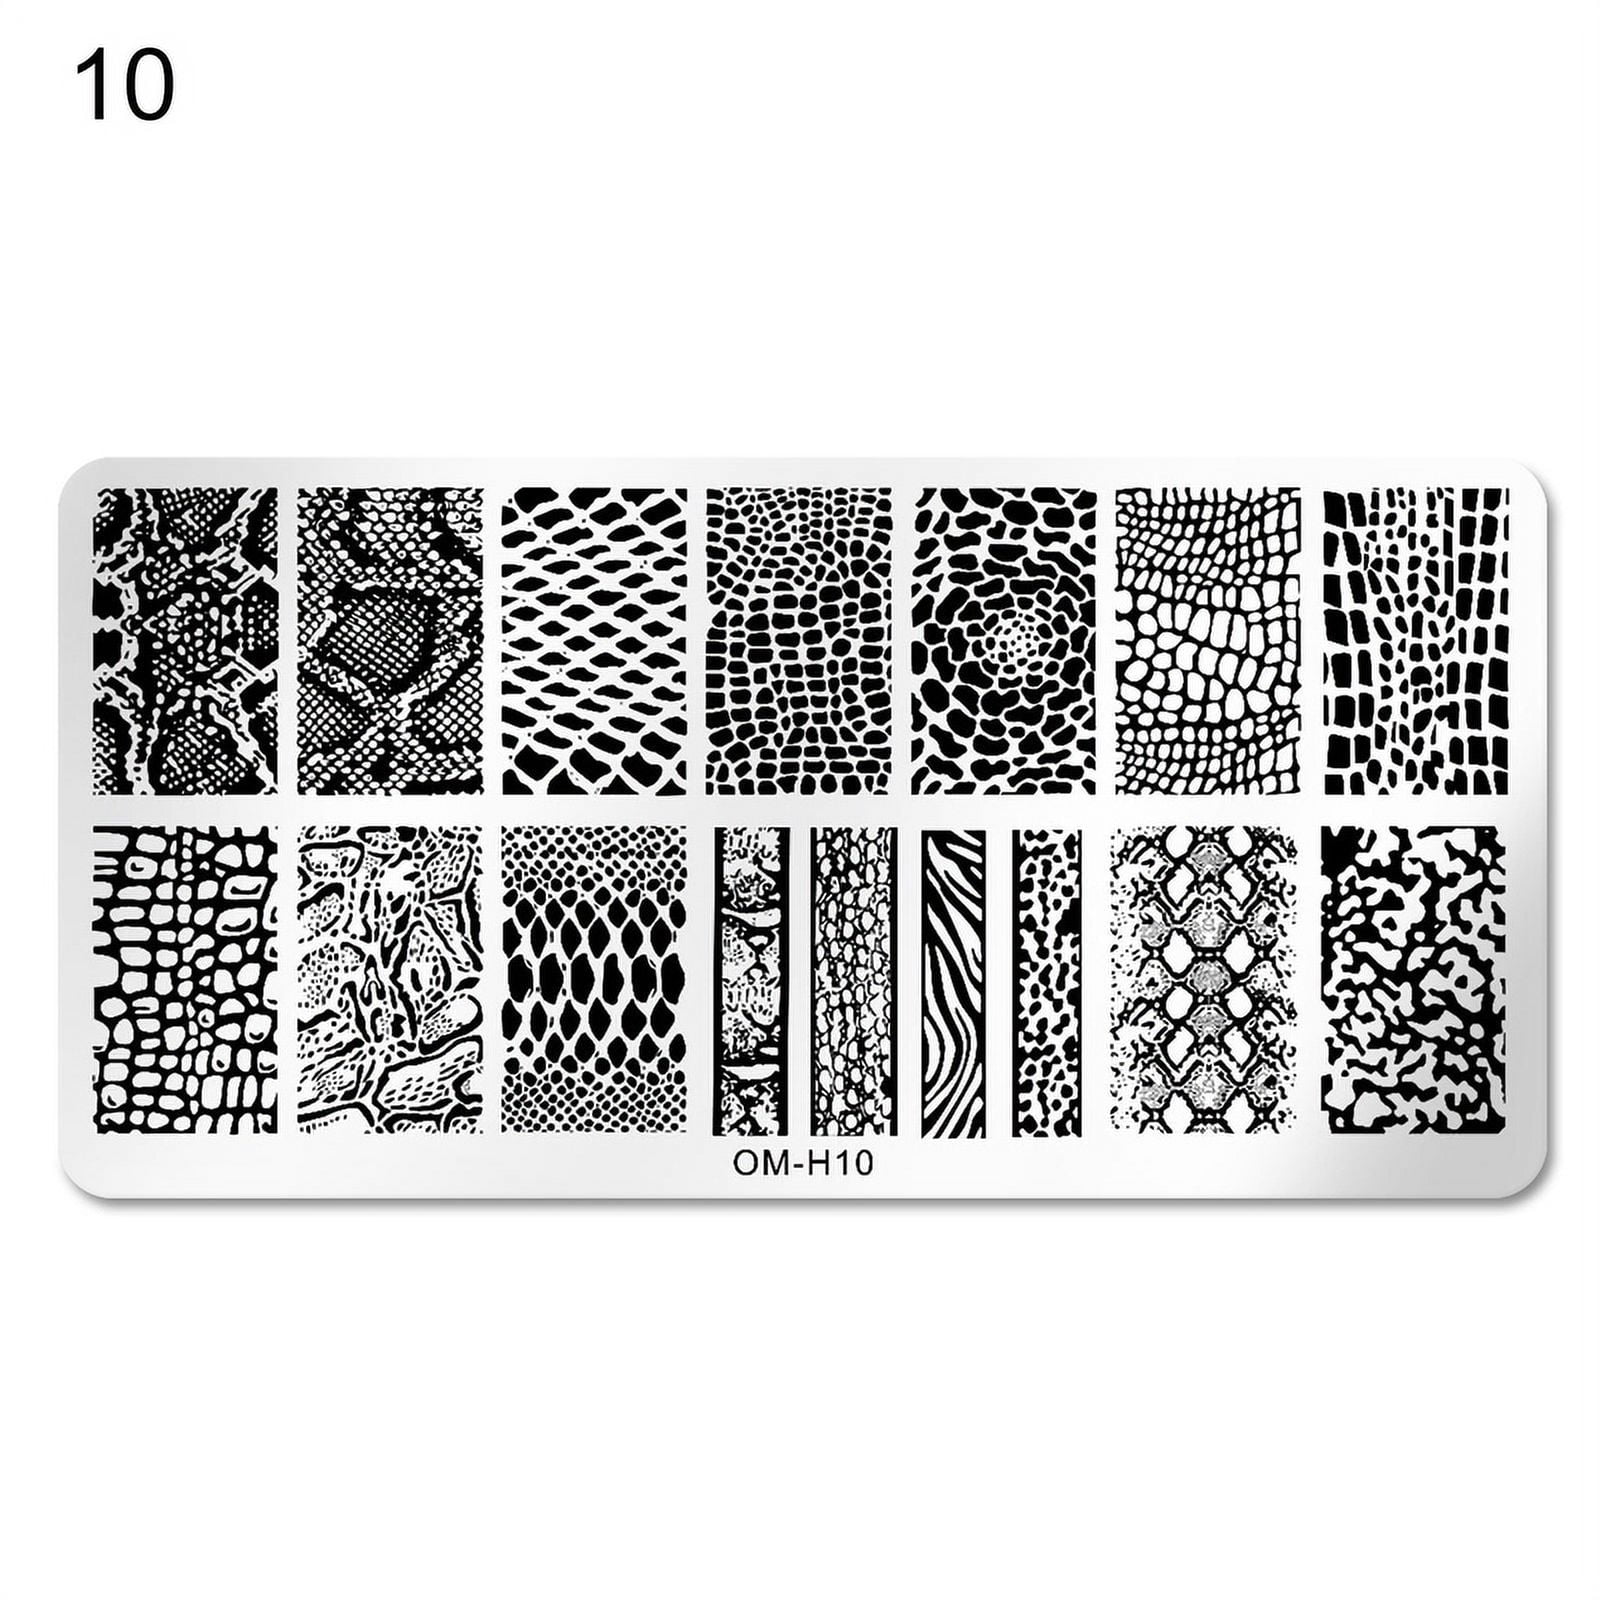 Bcloud Nail Stamping Plates Cost-effective Precise Position Nail Tools Nail  Art Stamping Plates for Salon 